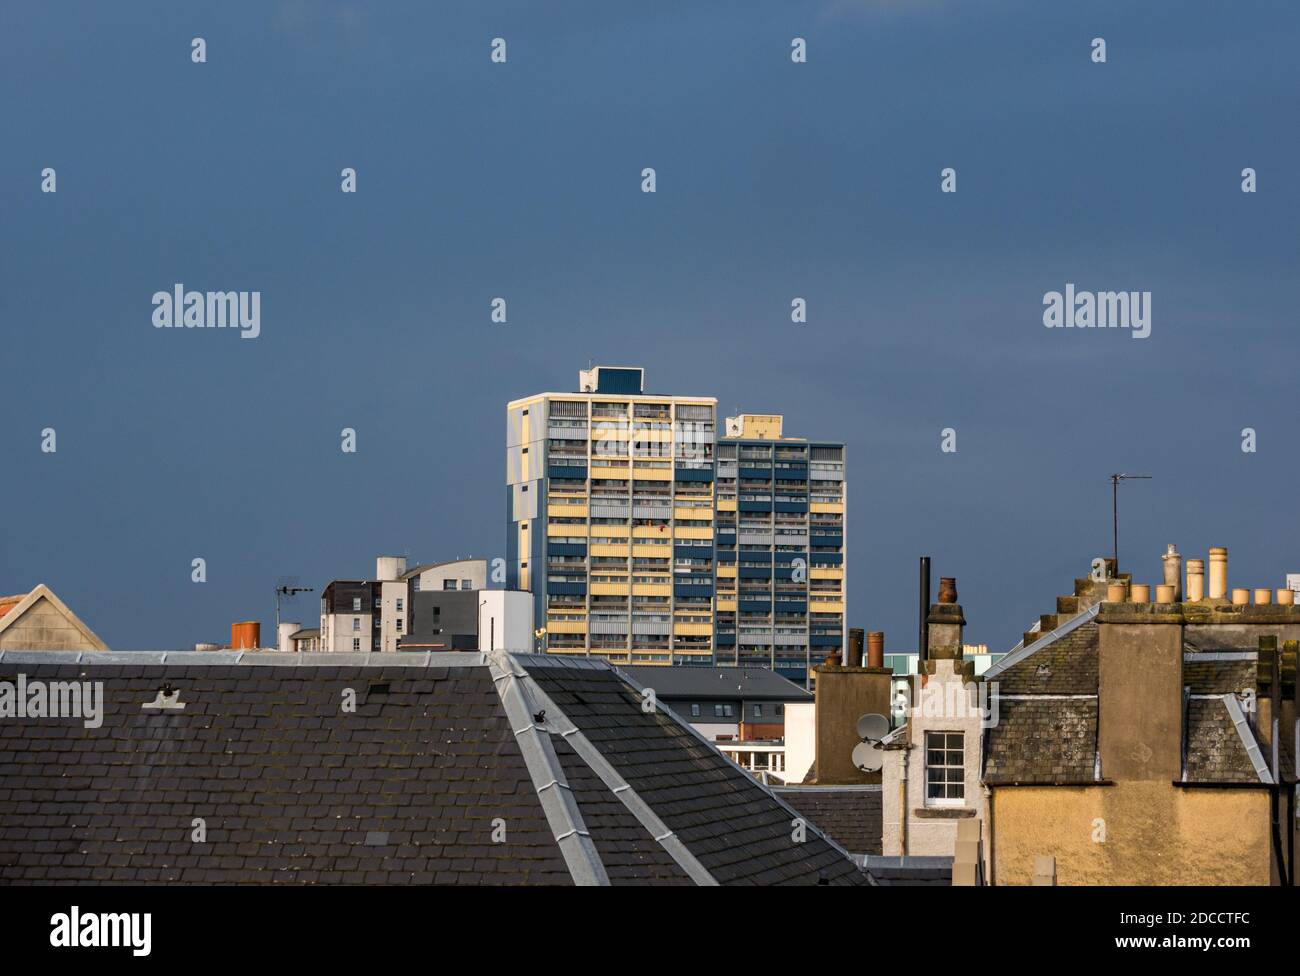 Council tower block of flats towering over rooftops with dark sky, Leith, Edinburgh, Scotland, UK Stock Photo